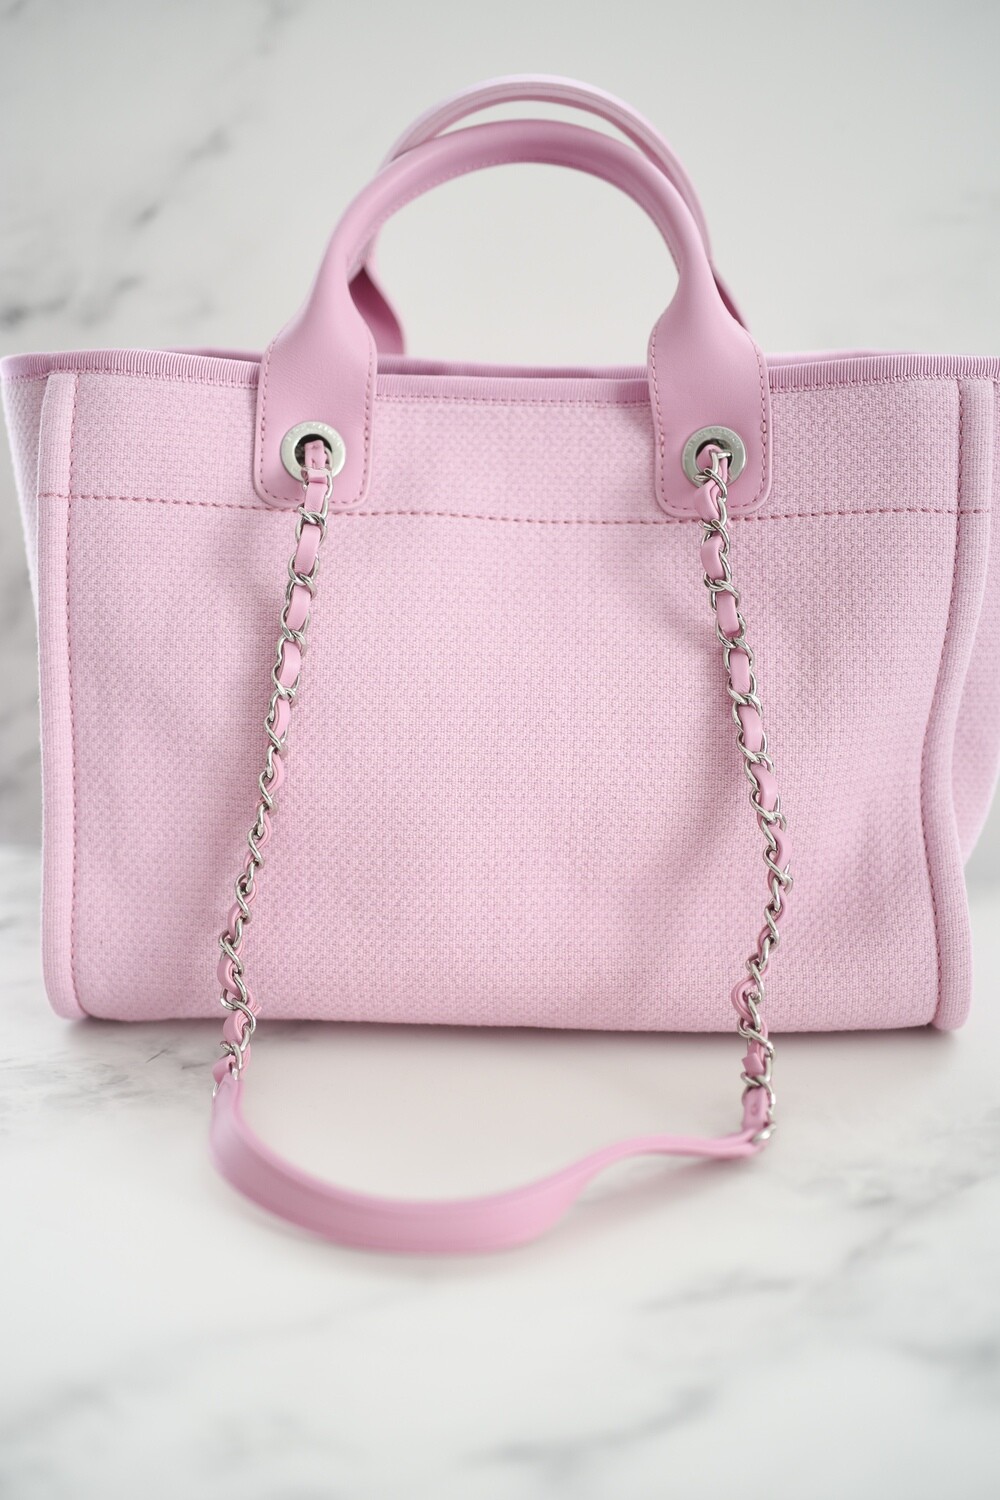 Chanel Deauville Small with Handles and Pouch, Pink with Silver Hardware,  New in Dustbag WA001